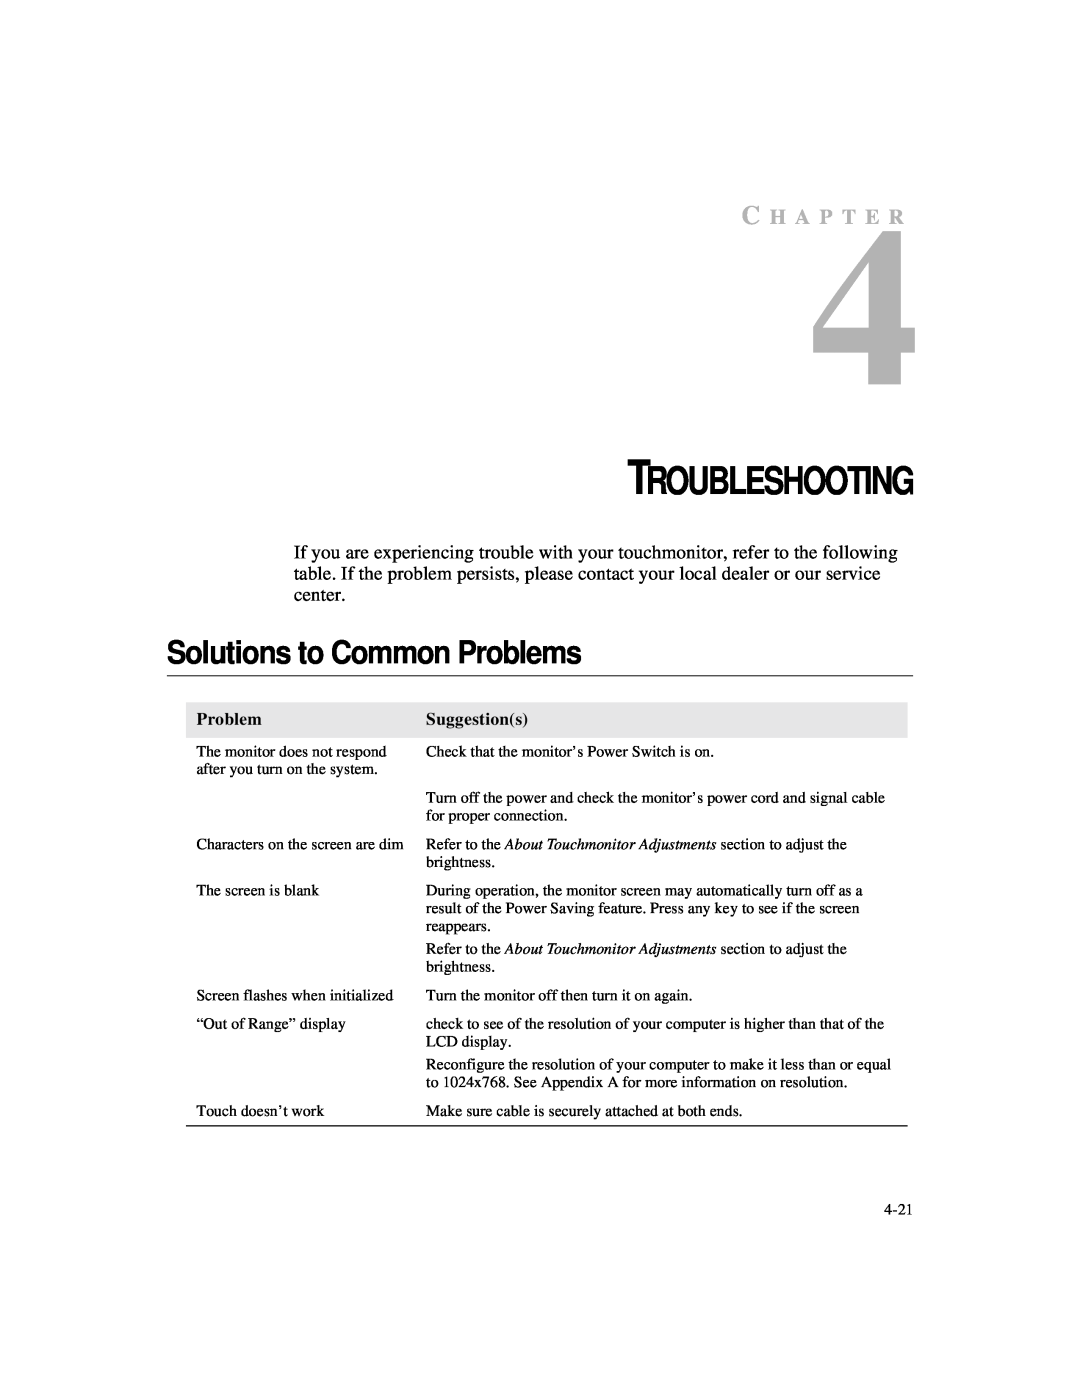 Elo TouchSystems 1524L manual Troubleshooting, Solutions to Common Problems, C H A P T E R, Suggestions 